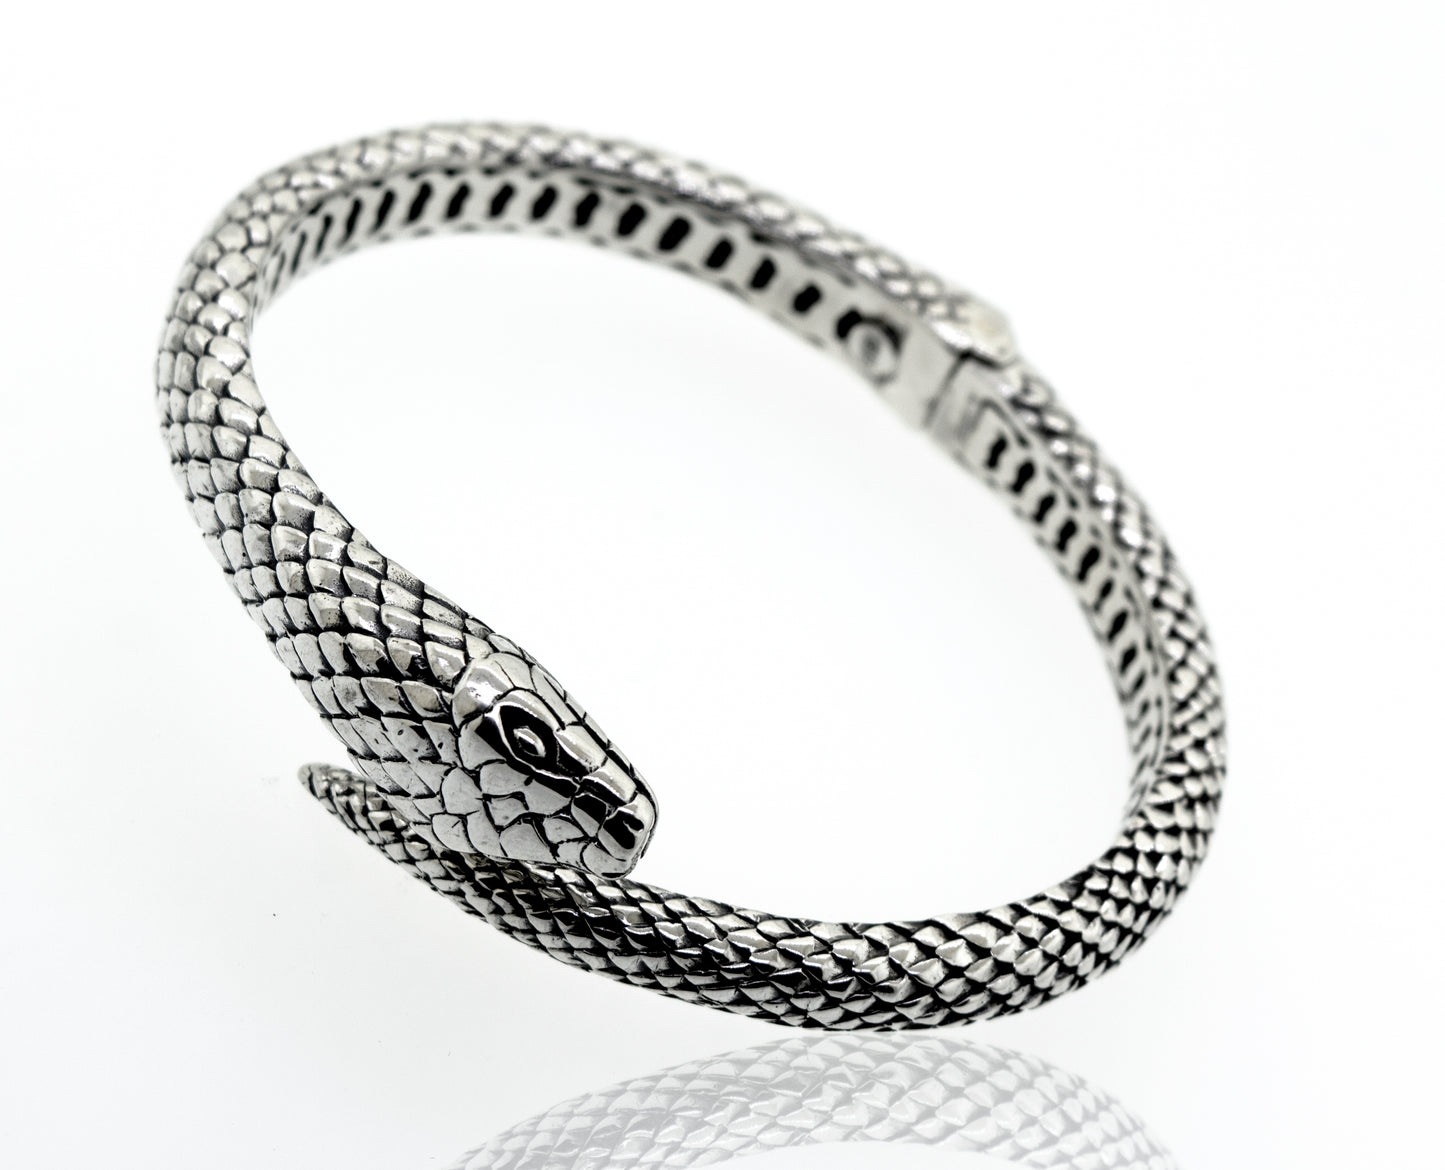 An Enchanting Hinge Snake Bracelet by Super Silver on a white surface.